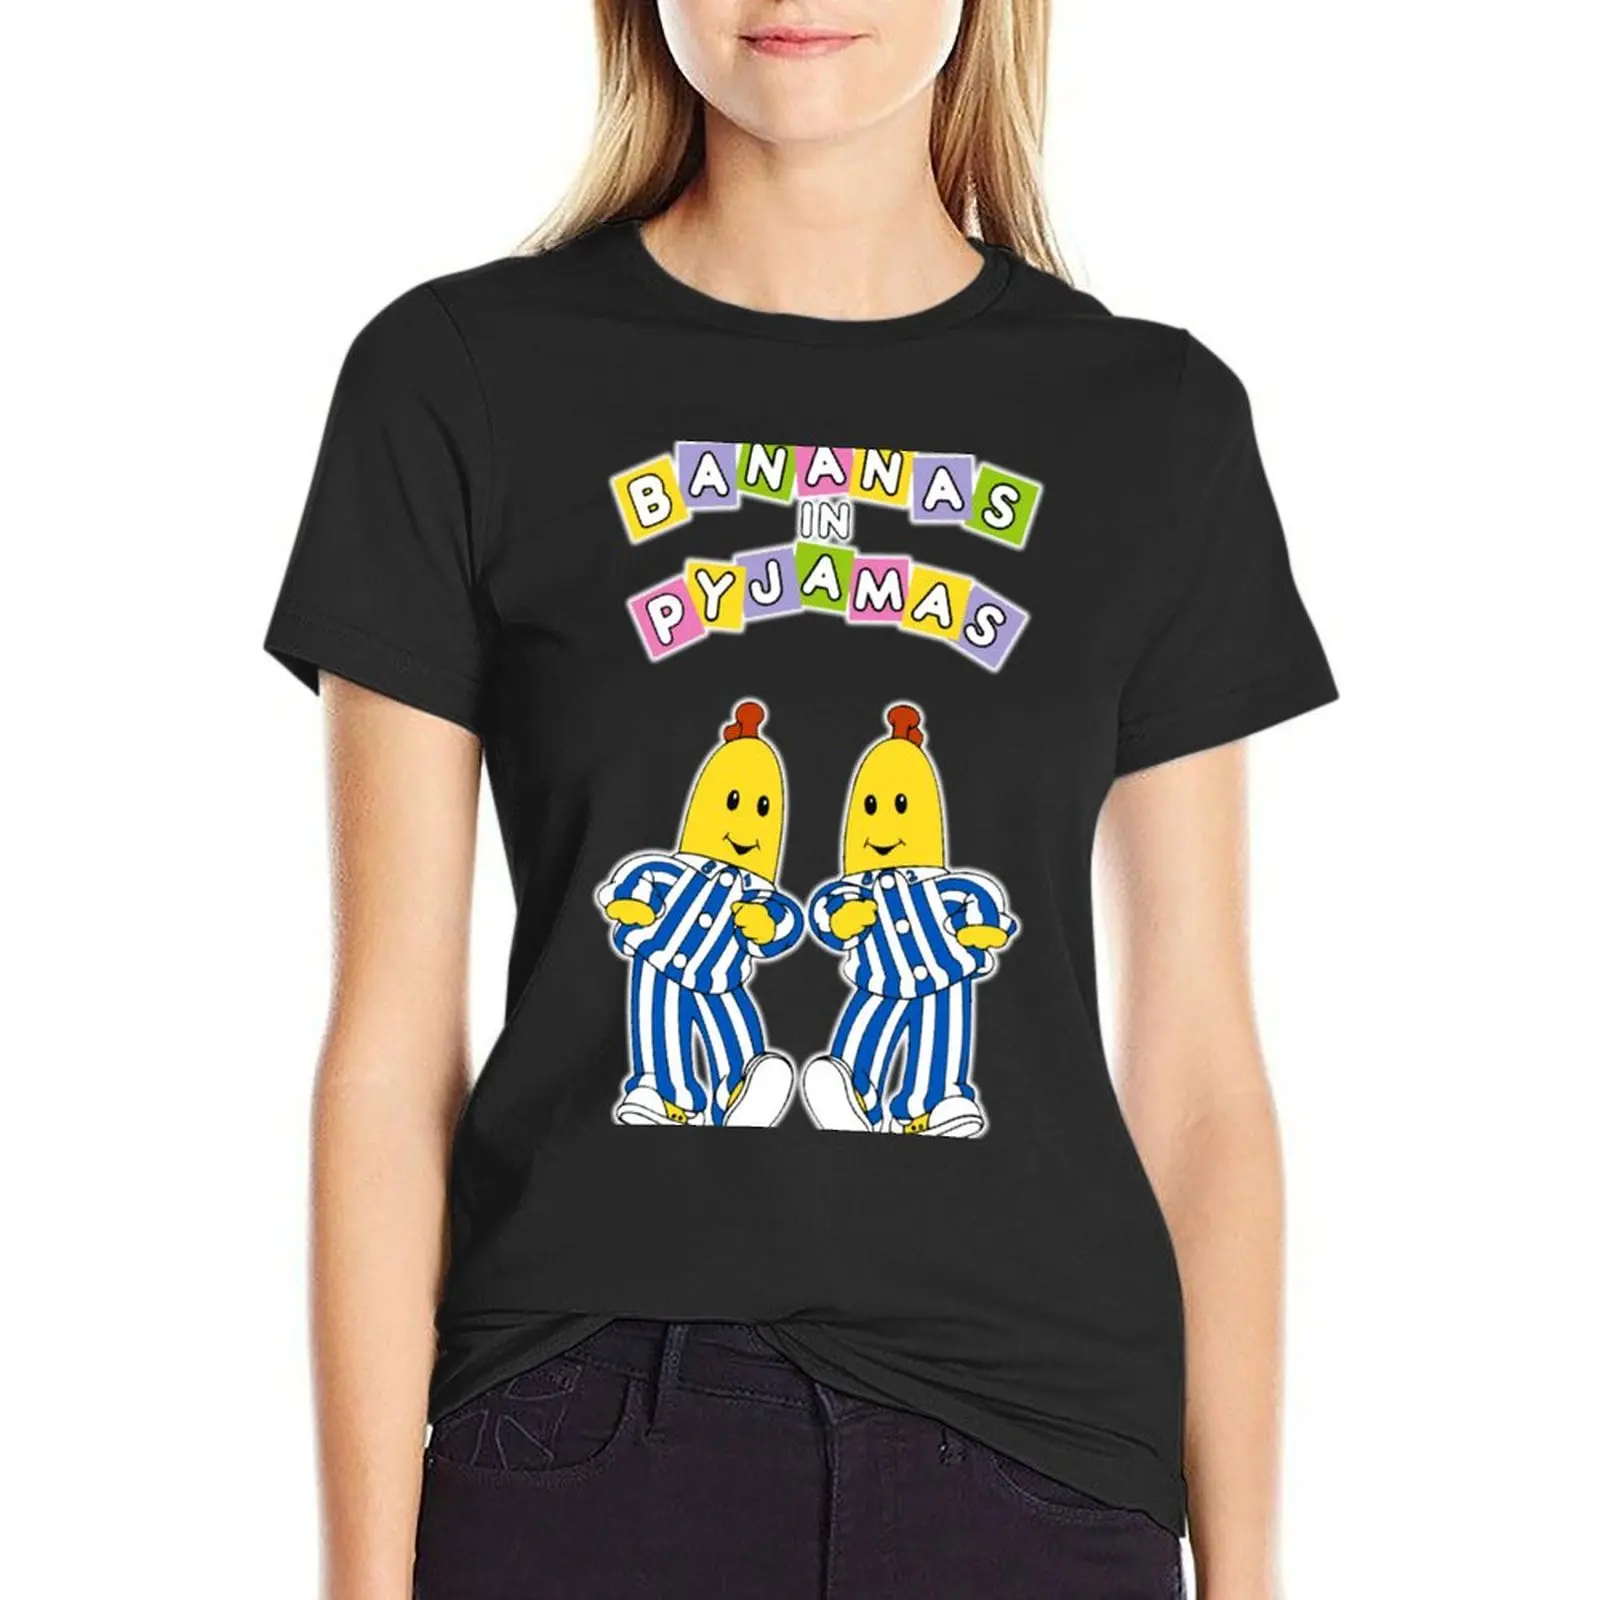 

Bananas in pyjamas with sign T-shirt hippie clothes cute tops Female clothing cat shirts for Women